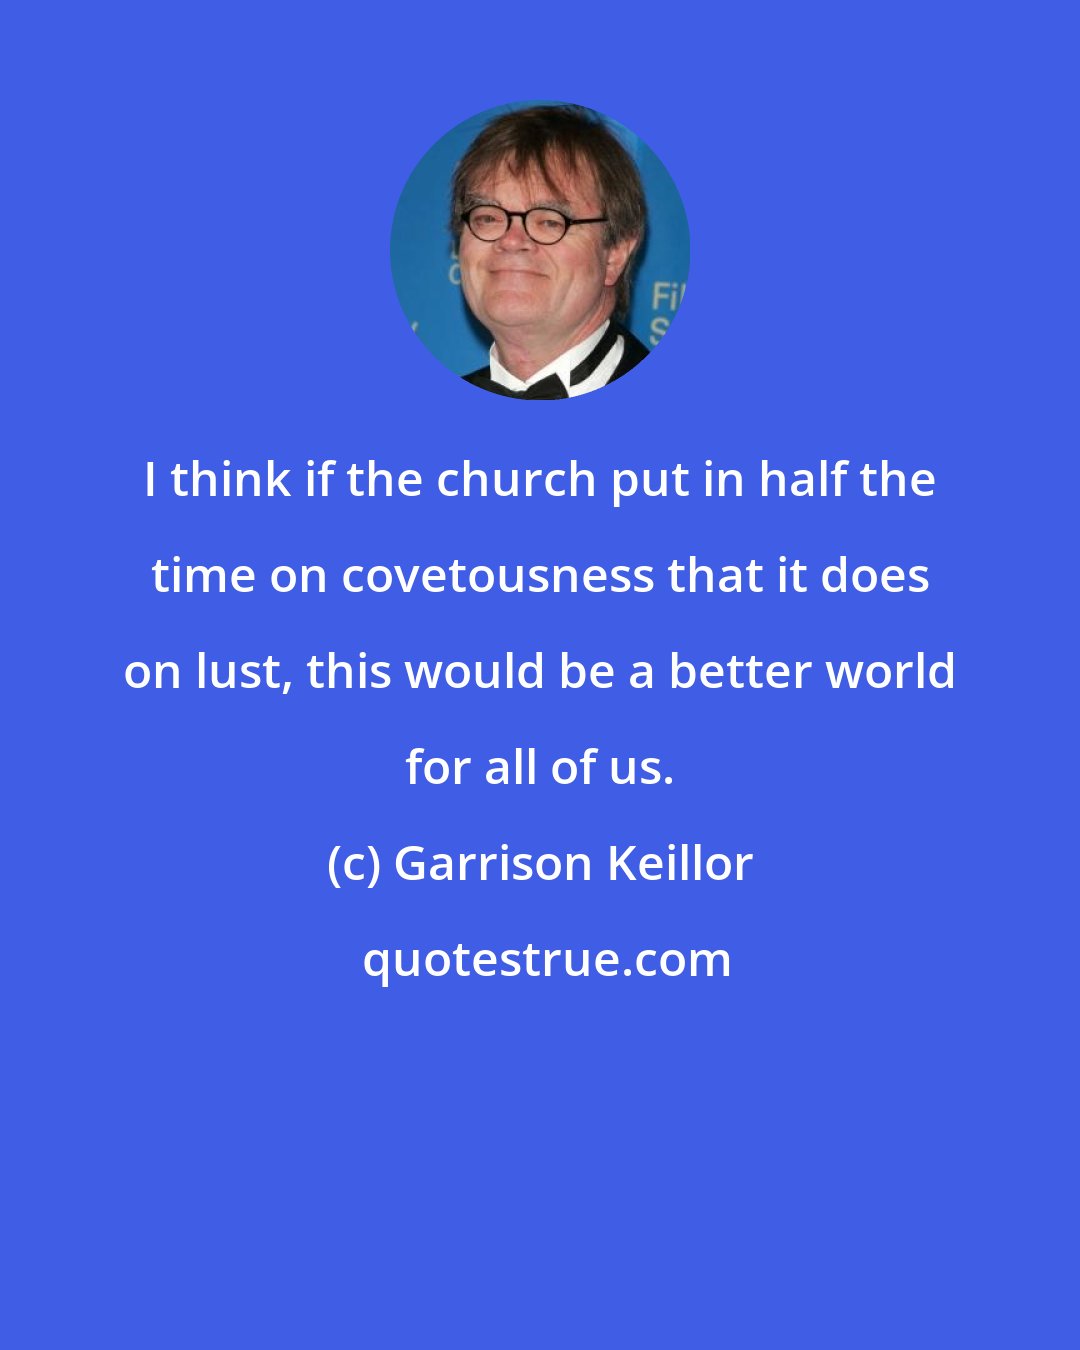 Garrison Keillor: I think if the church put in half the time on covetousness that it does on lust, this would be a better world for all of us.